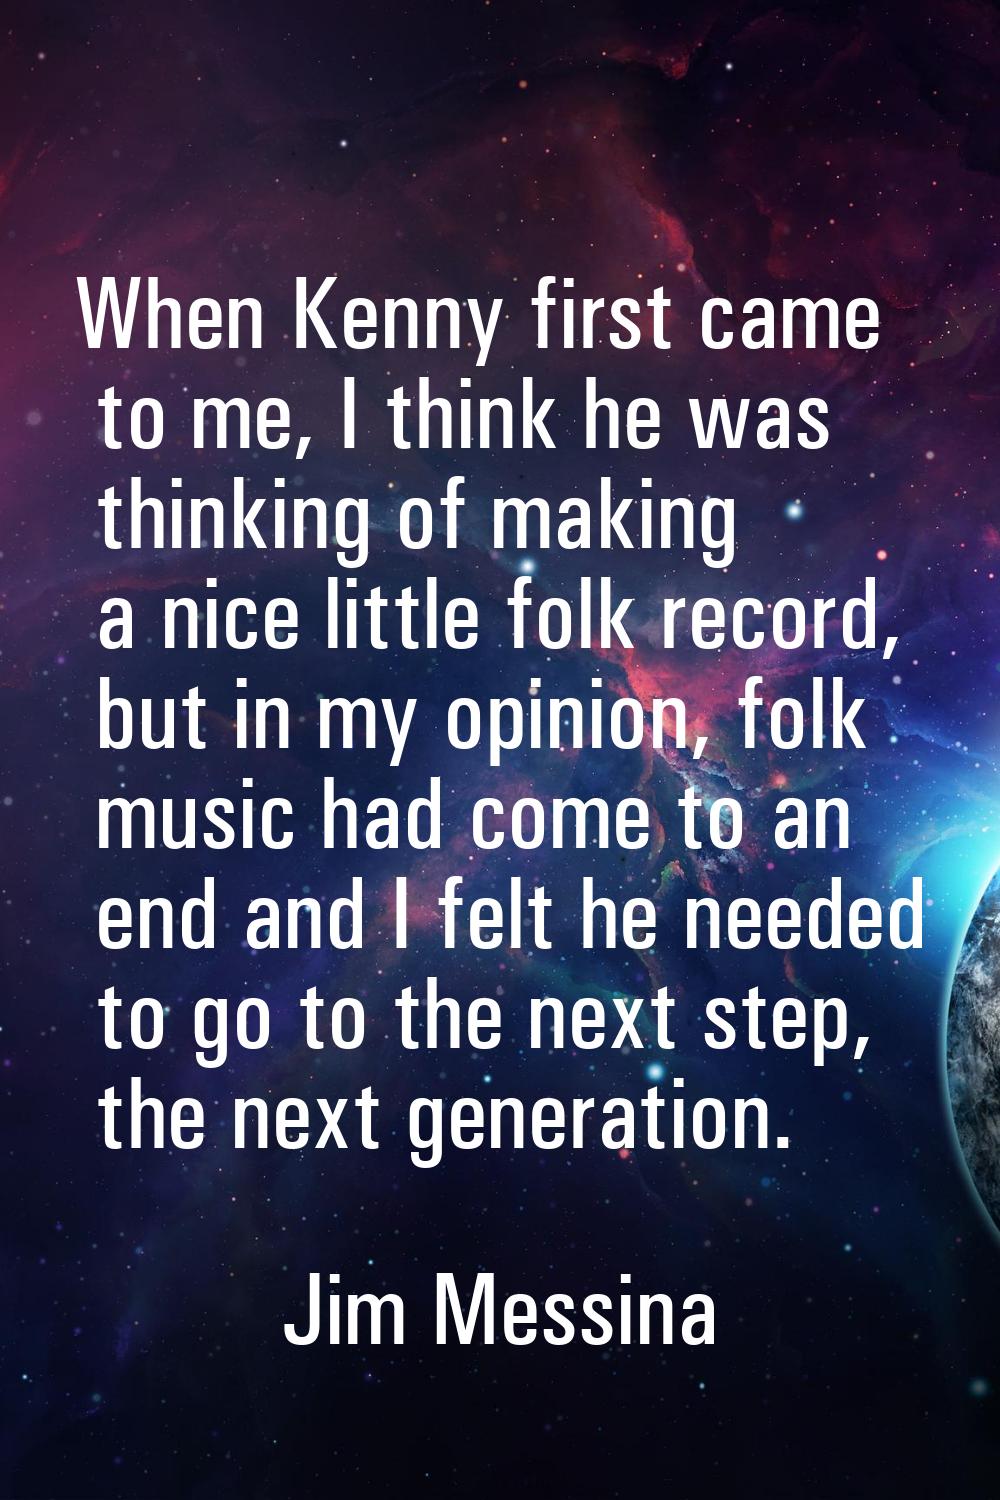 When Kenny first came to me, I think he was thinking of making a nice little folk record, but in my